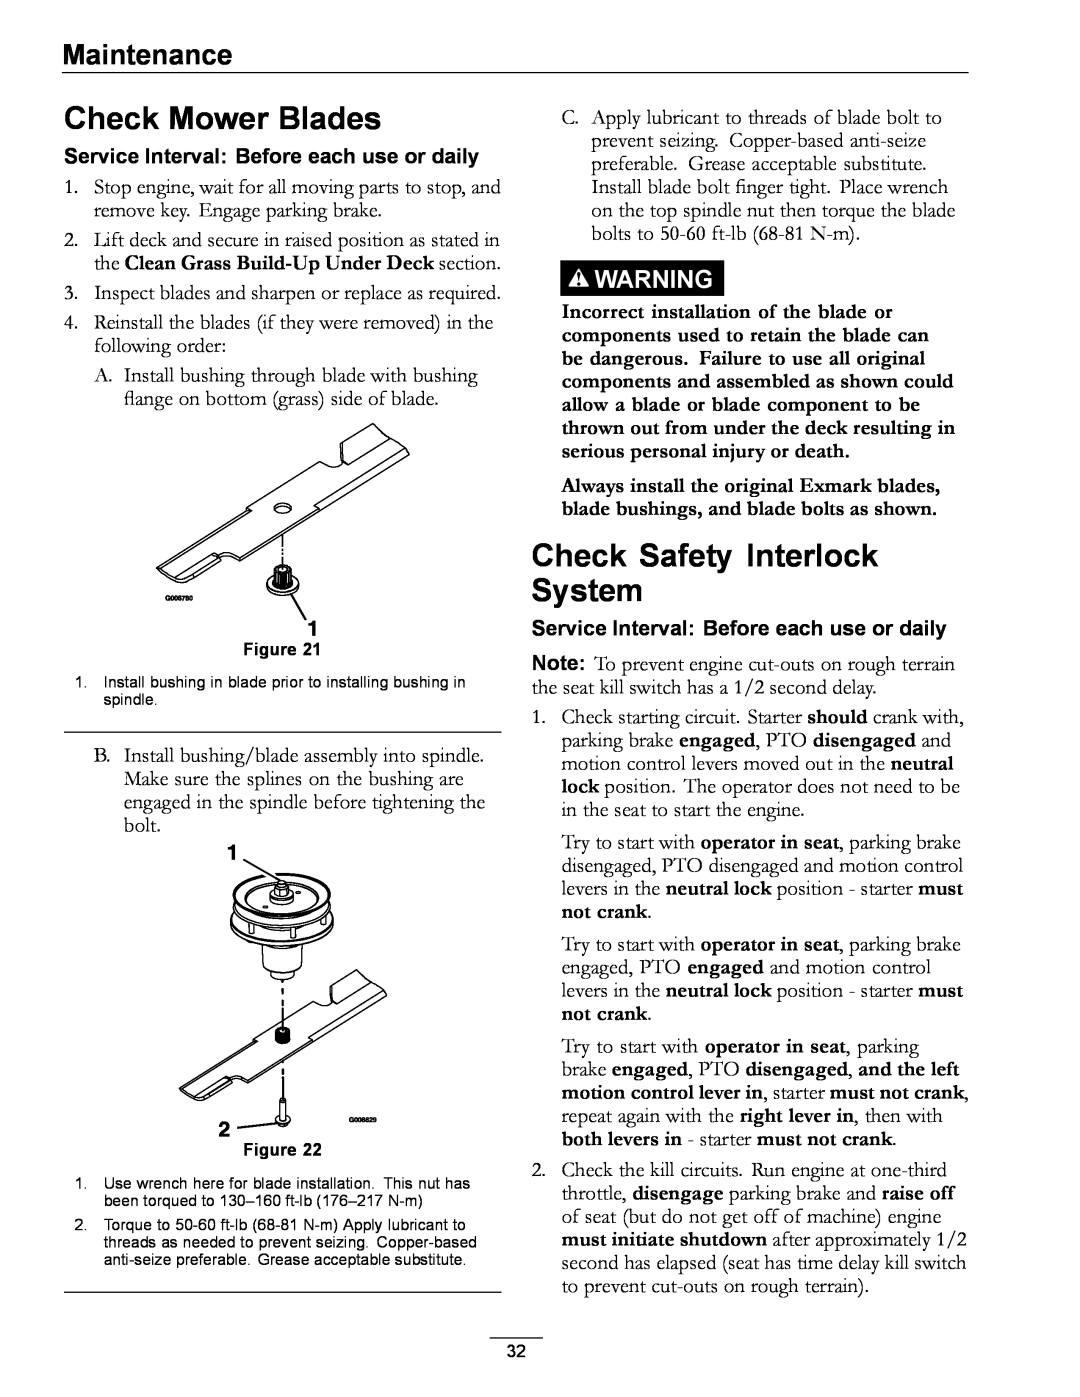 Exmark 0, 312 Check Mower Blades, Check Safety Interlock System, Maintenance, Service Interval Before each use or daily 